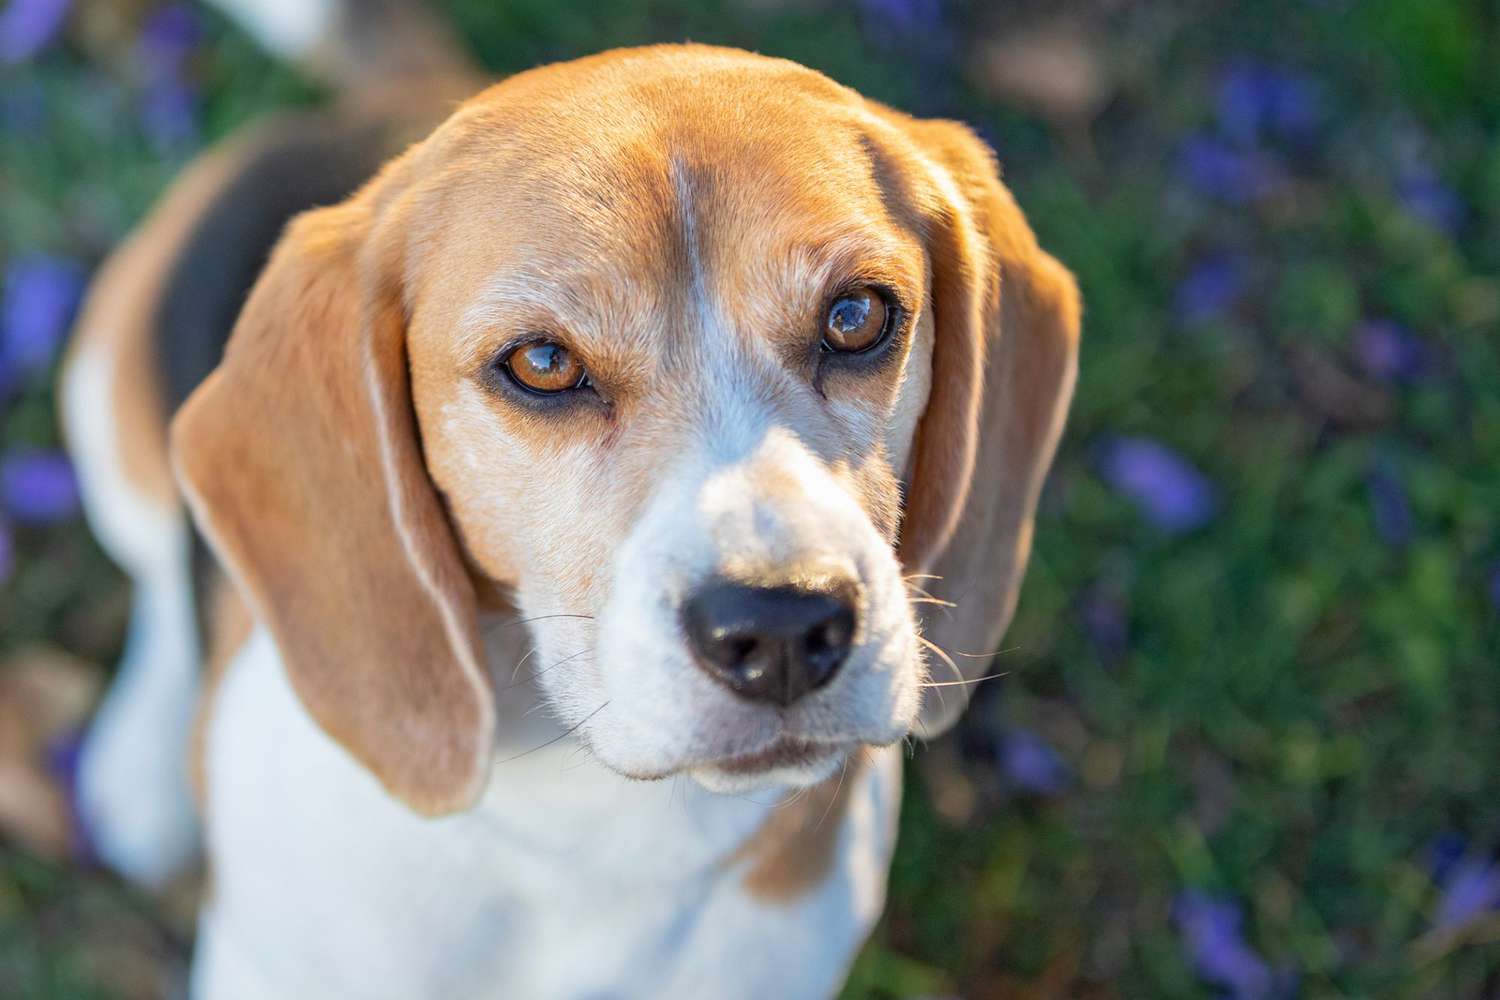 Beagle puppy poses for camera with purple flowers in blurred background